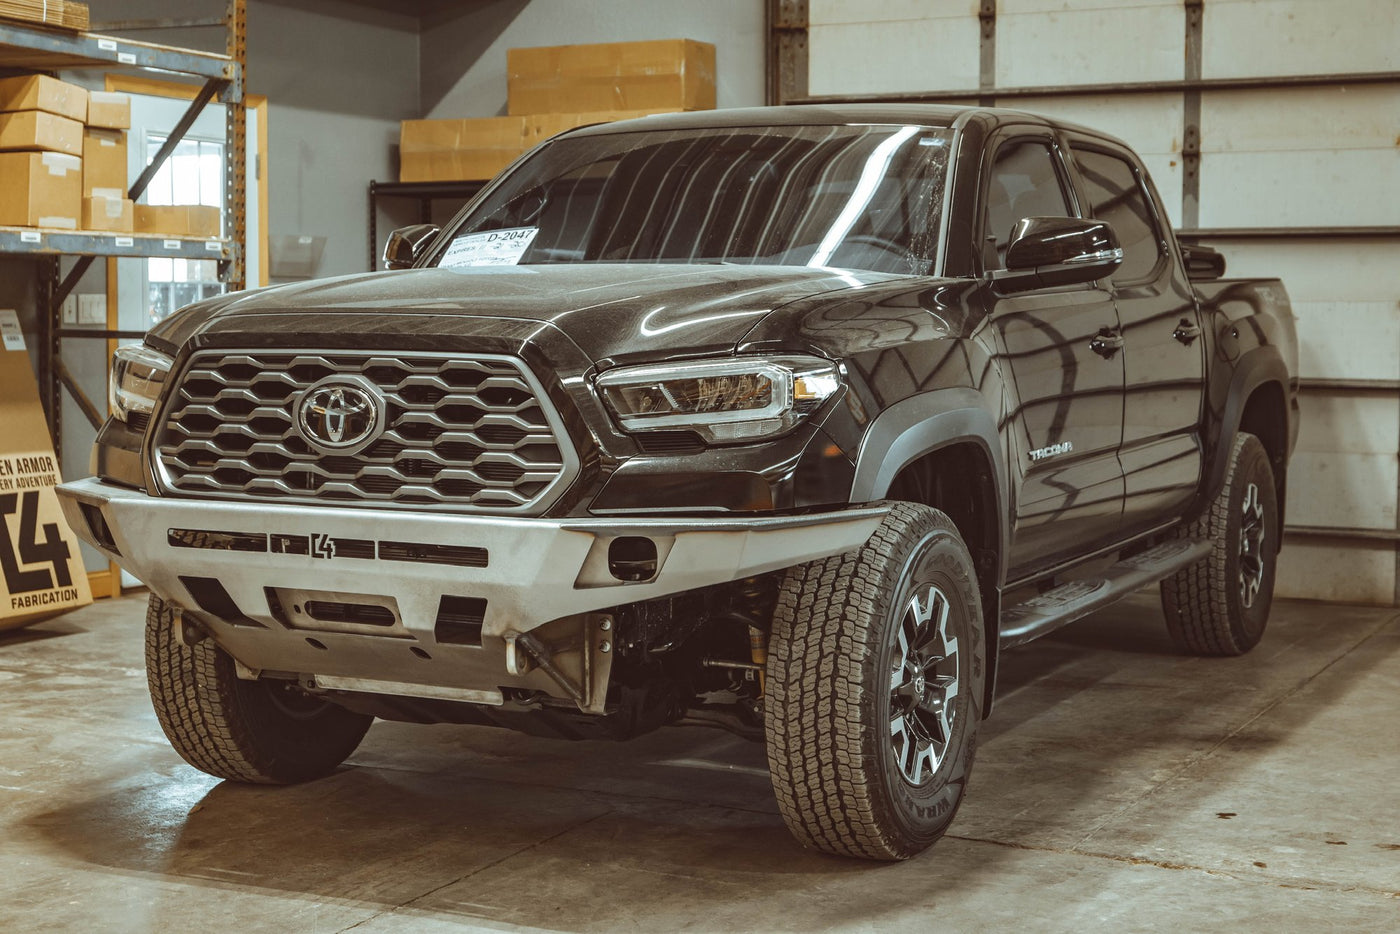 C4 Fabrication's 2016+ Tacoma Overland Front Bumper with No Bull Bar